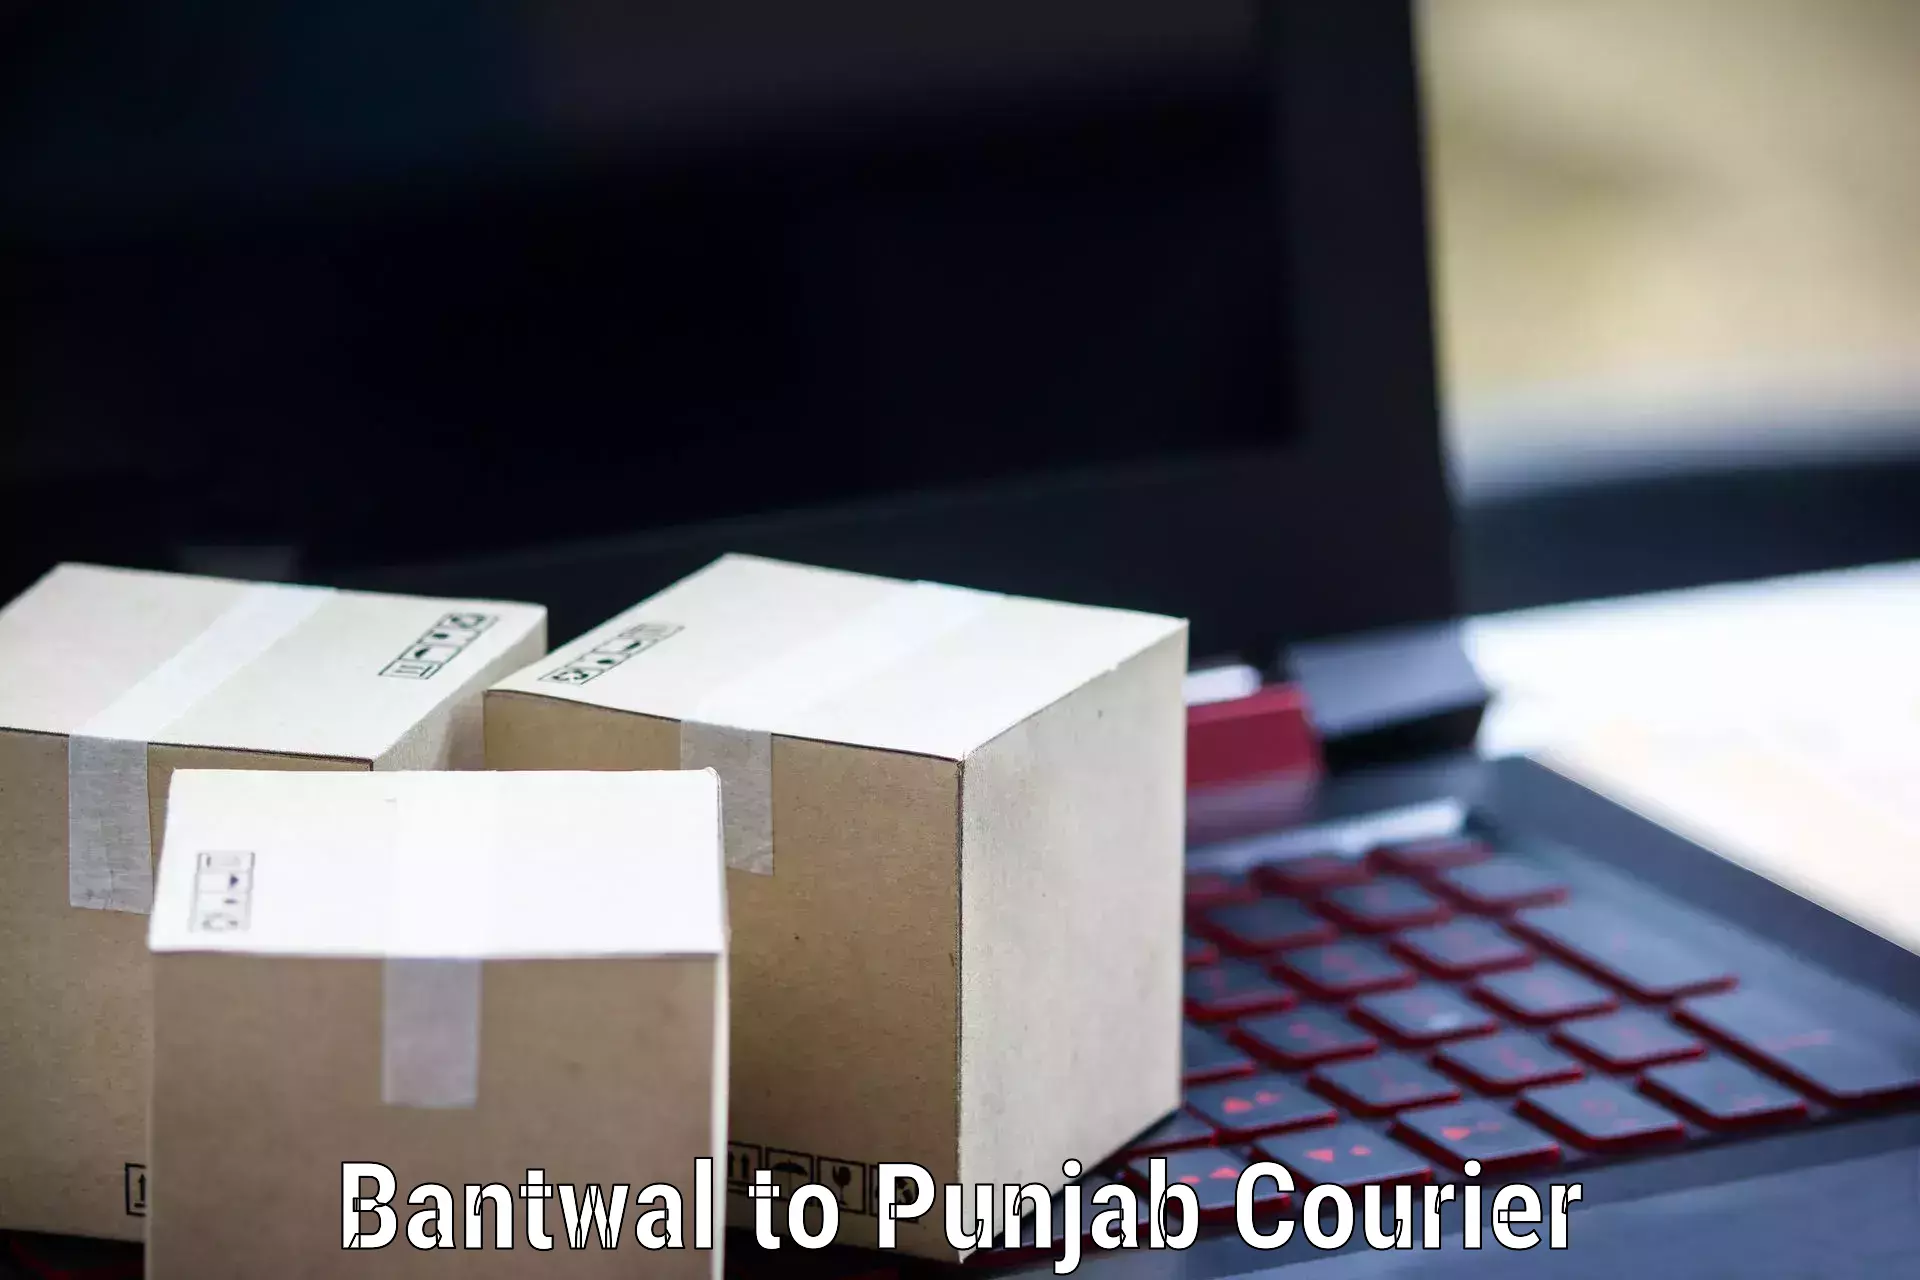 Digital courier platforms Bantwal to Ludhiana